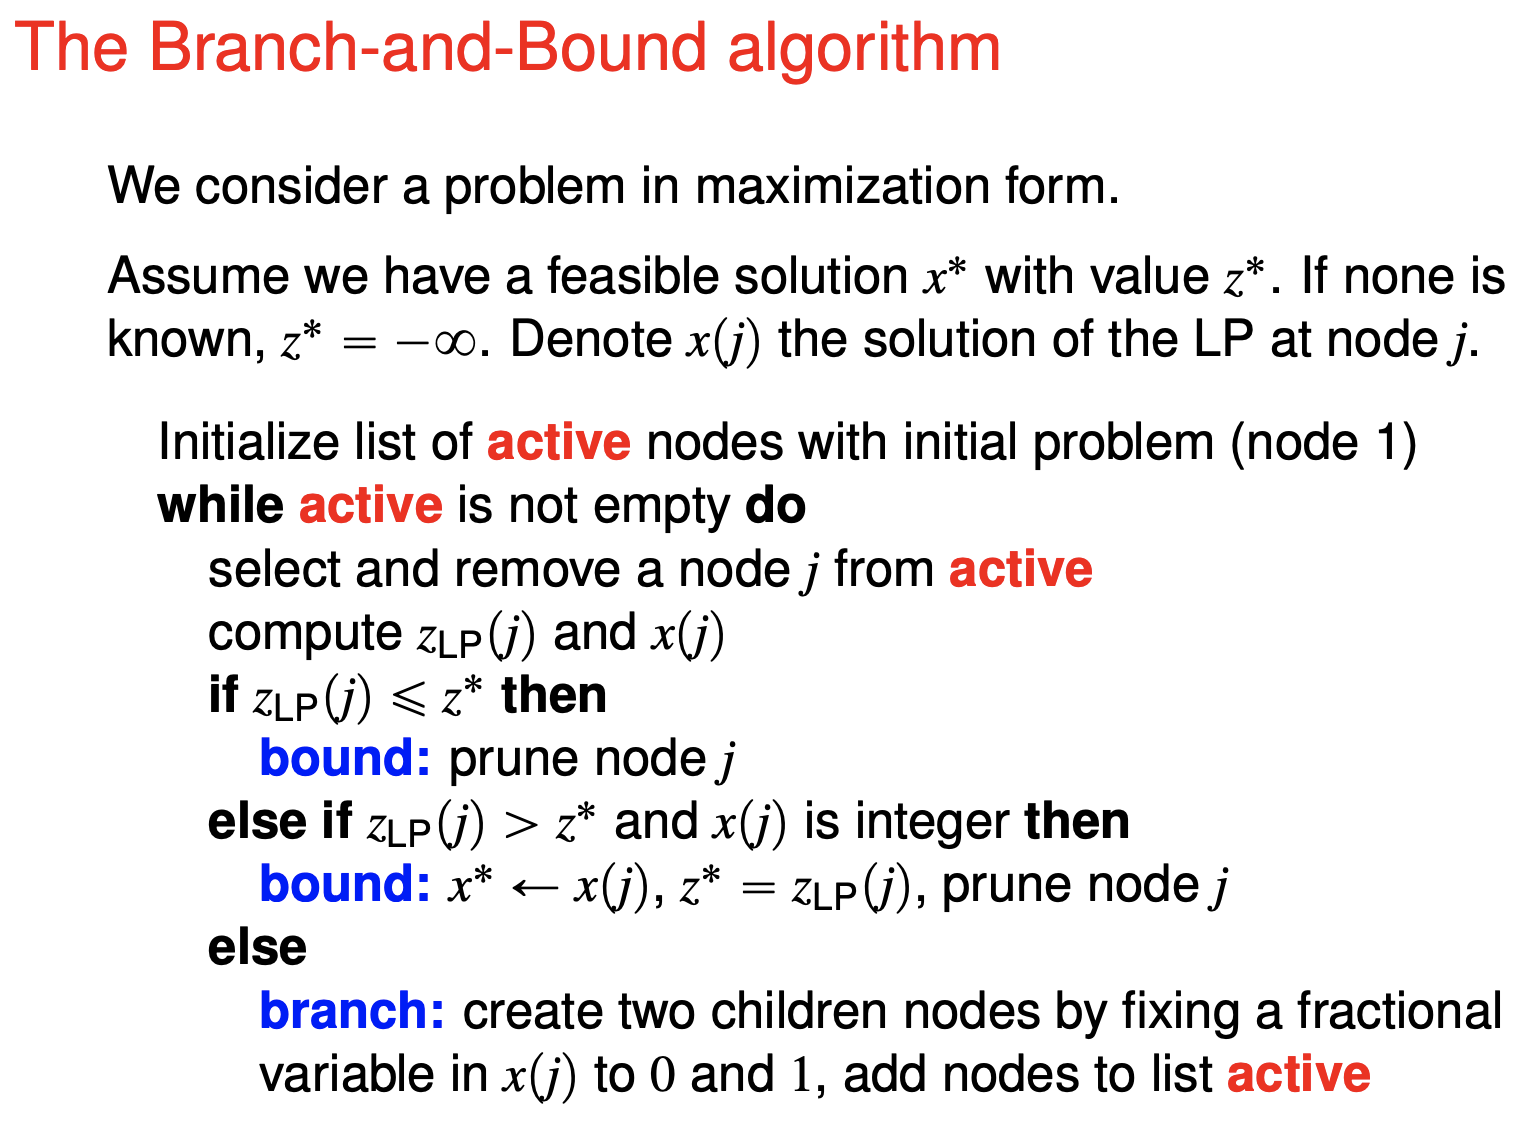 branch-and-bound-algorithm.png